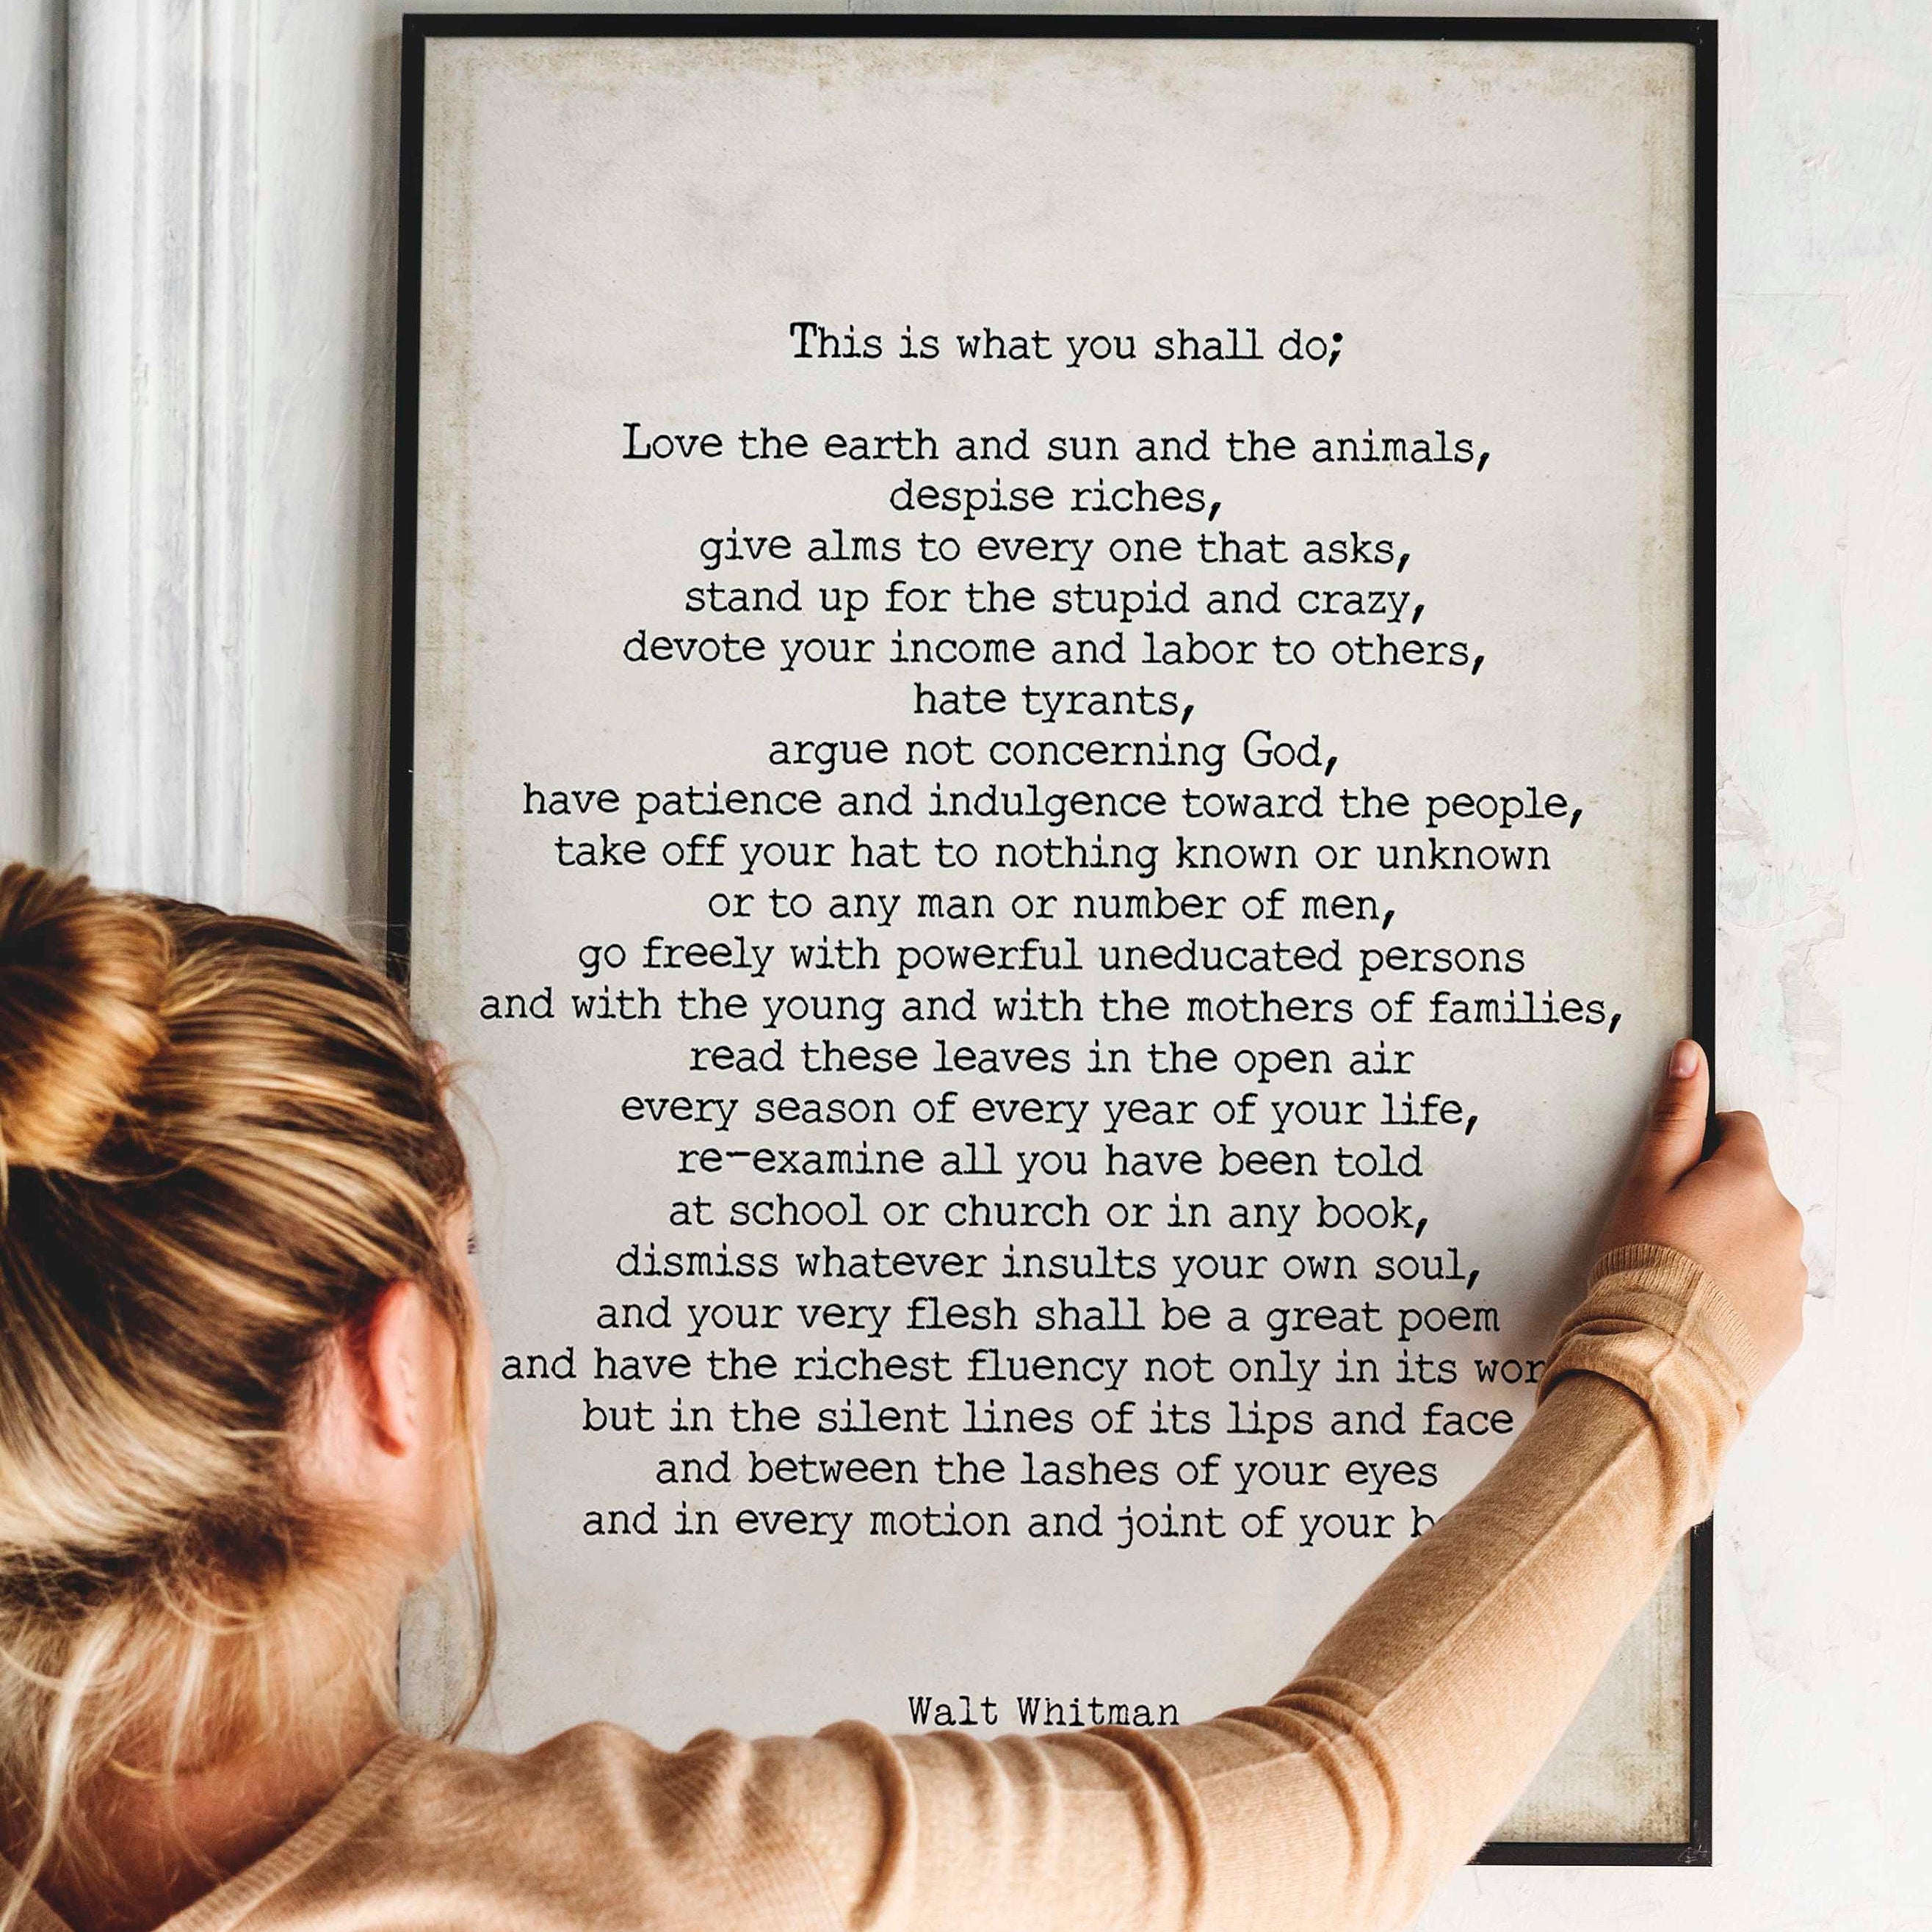 Walt Whitman Leaves of Grass Print, This Is What You Shall Do Inspirational Poem in Vintage or Black & White for Home Wall Decor